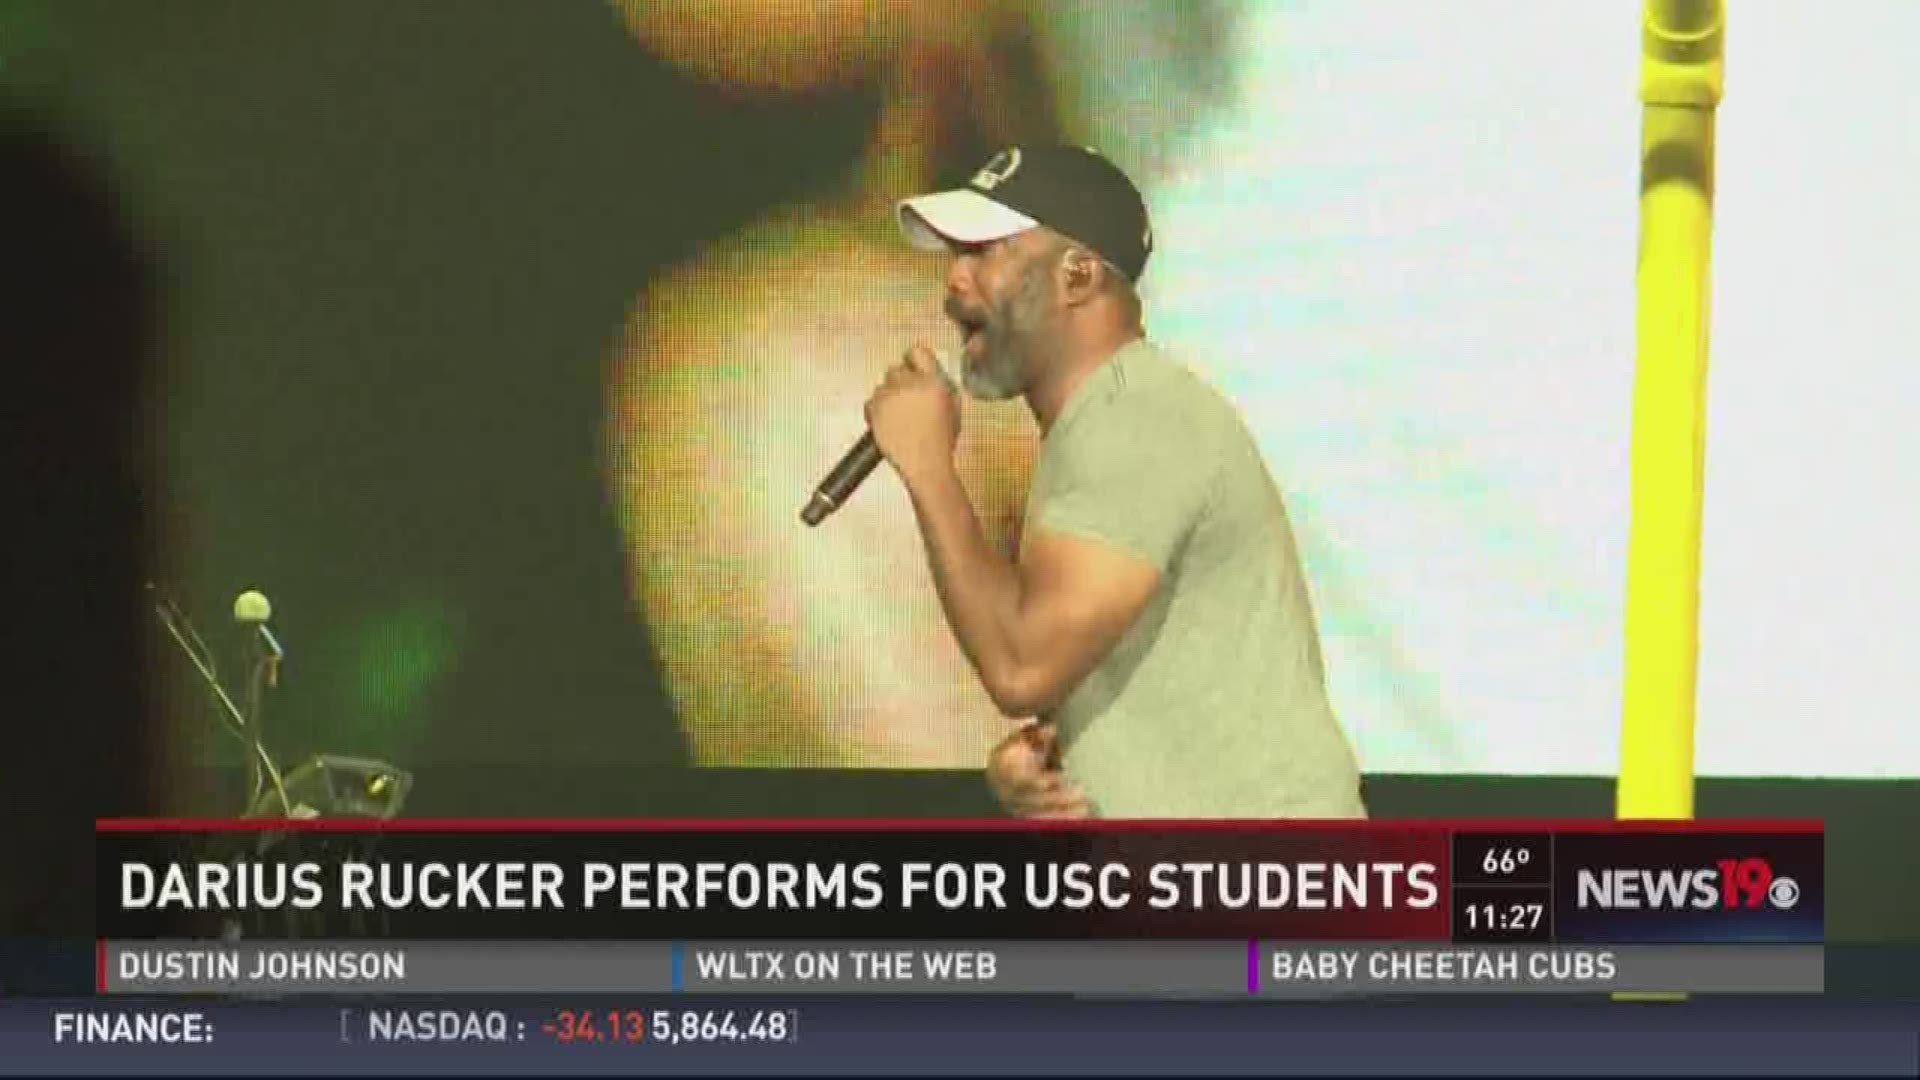 Darius Rucker performed a free concert for students at the Colonial Life Arena.